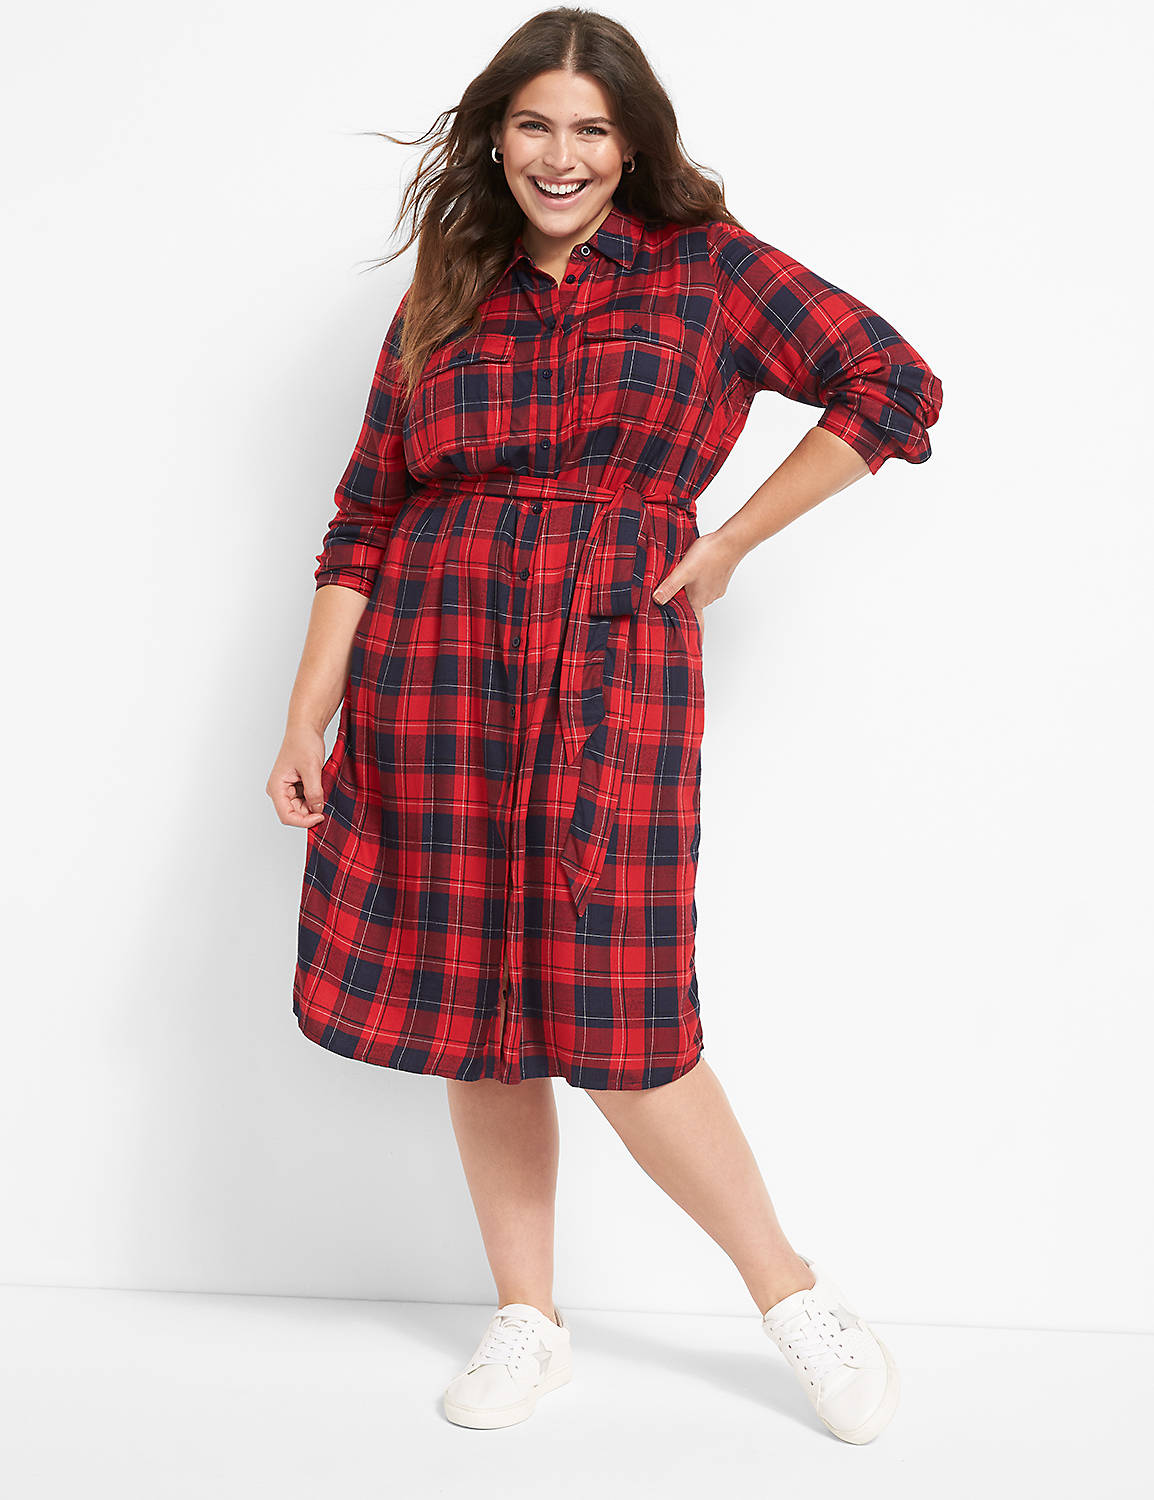 Long Sleeve Button Down Belted Shirt Dress 1124664:LBH21071_IcelandPlaid_CW14:20 Product Image 1